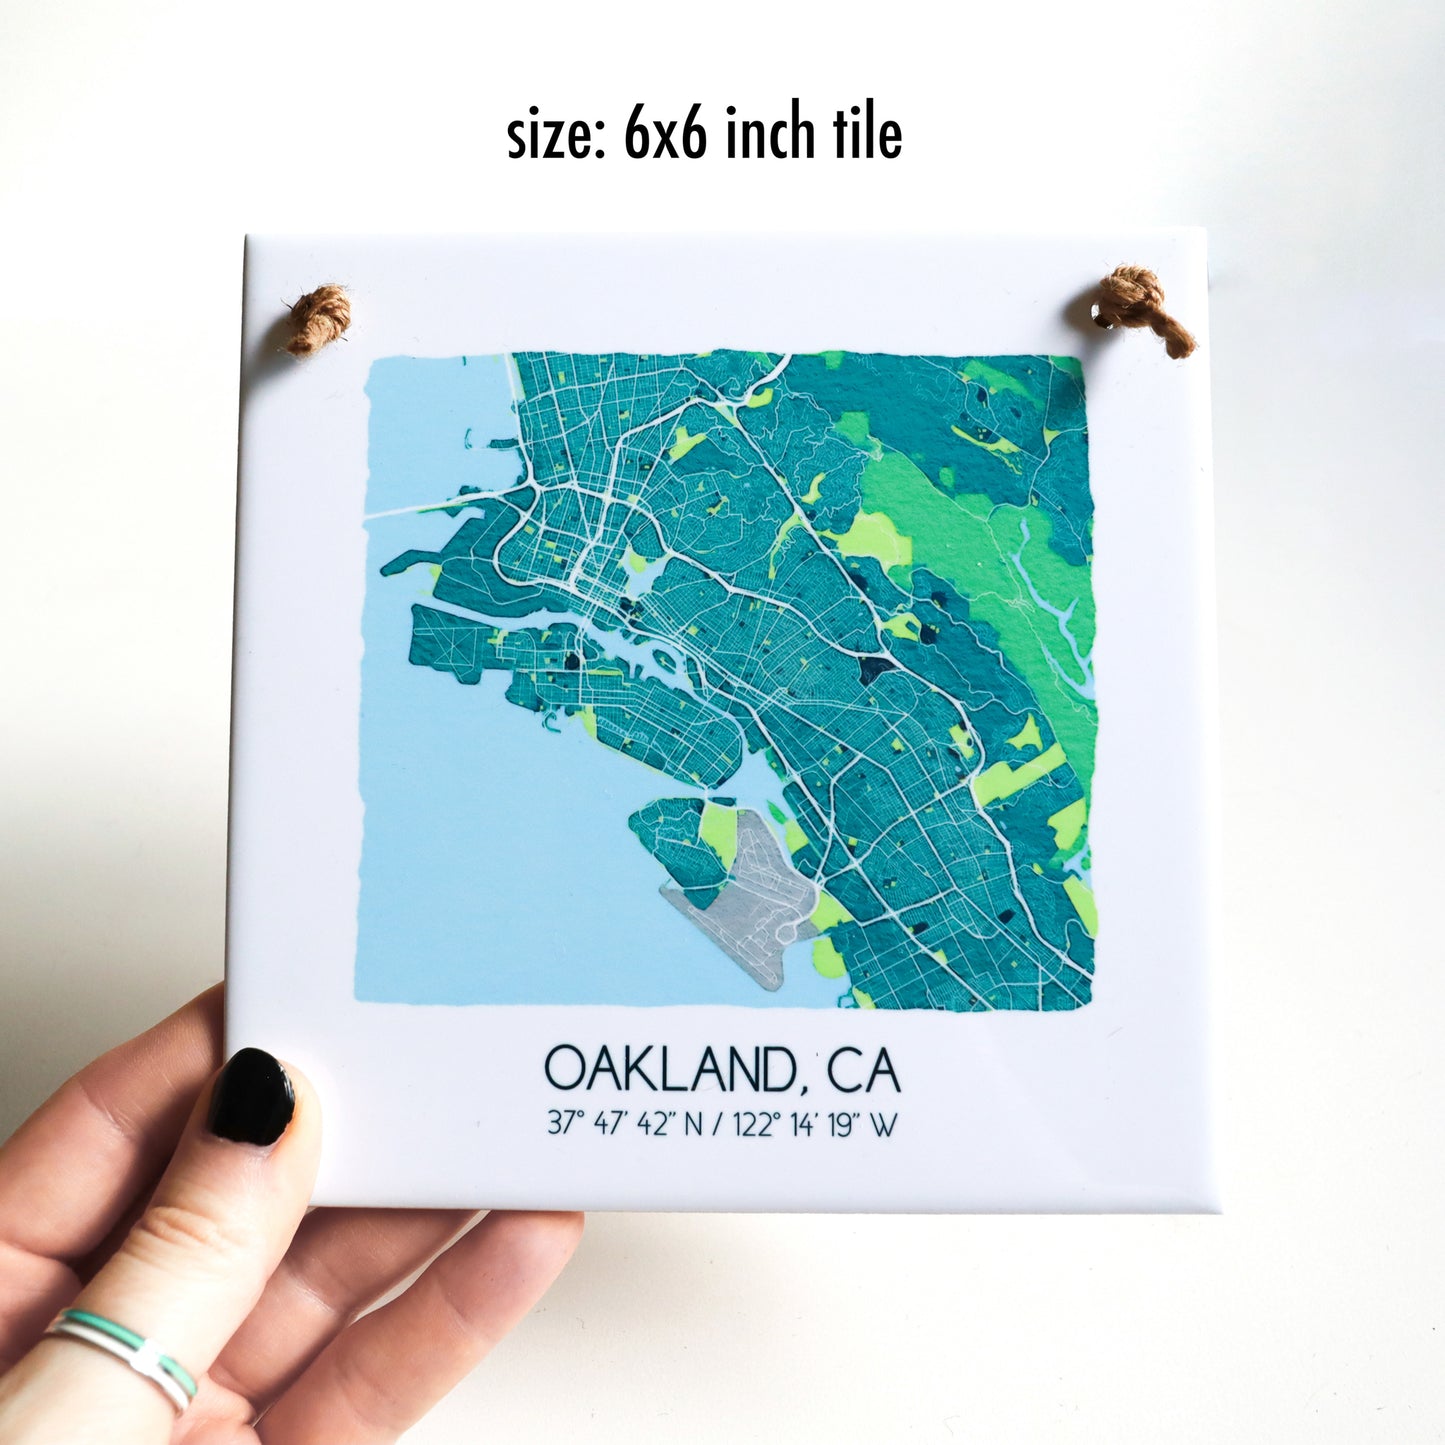 A hand holding a city map square tile sign, showing the 6x6 inch size